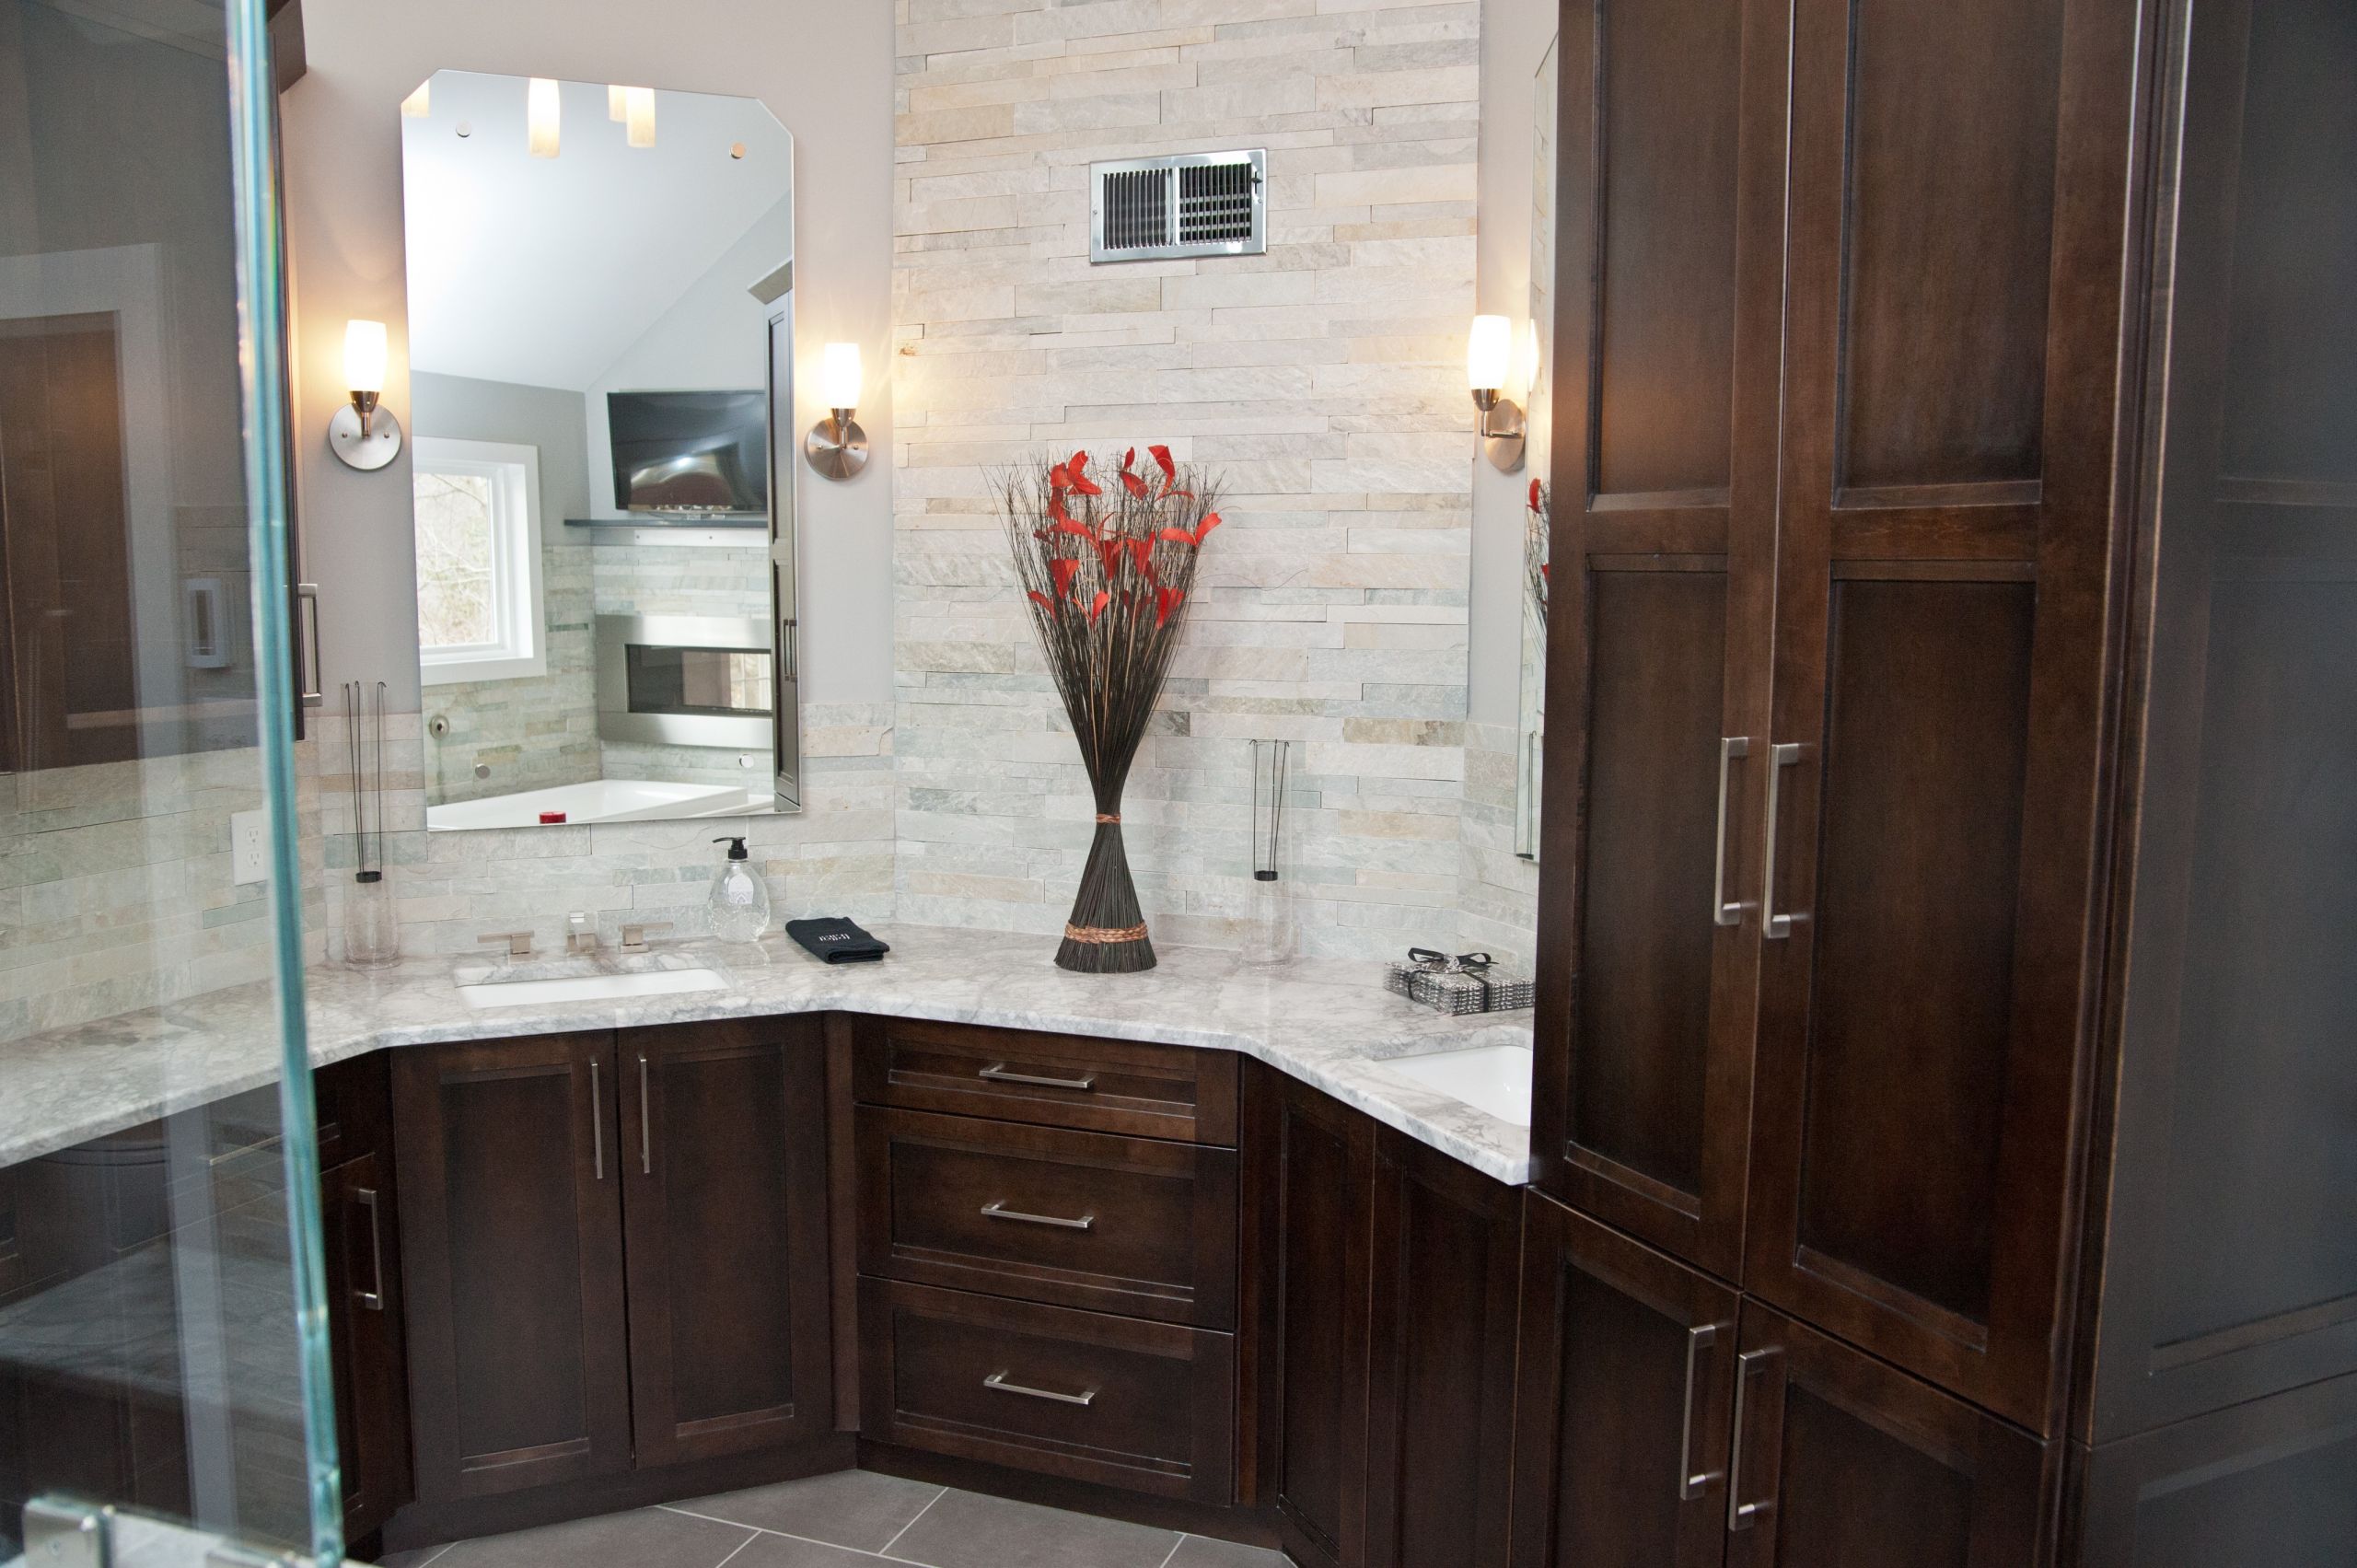 Bathroom Remodeling Nj
 NJ Bathroom Remodeling Tips Monmouth & Ocean County